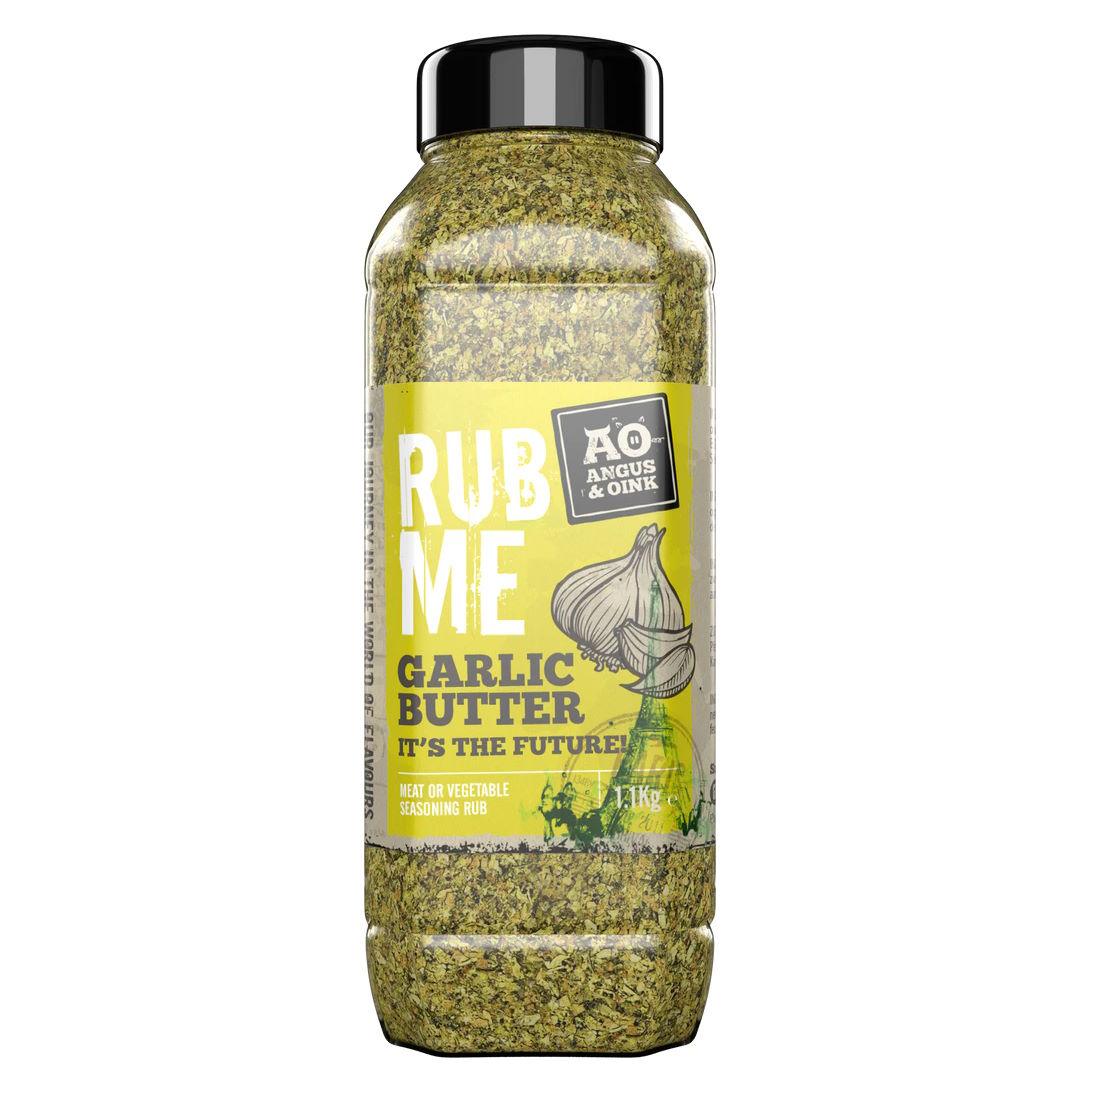 1.1kg Garlic Butter Seasoning from Angus & Oink - BBQ Land